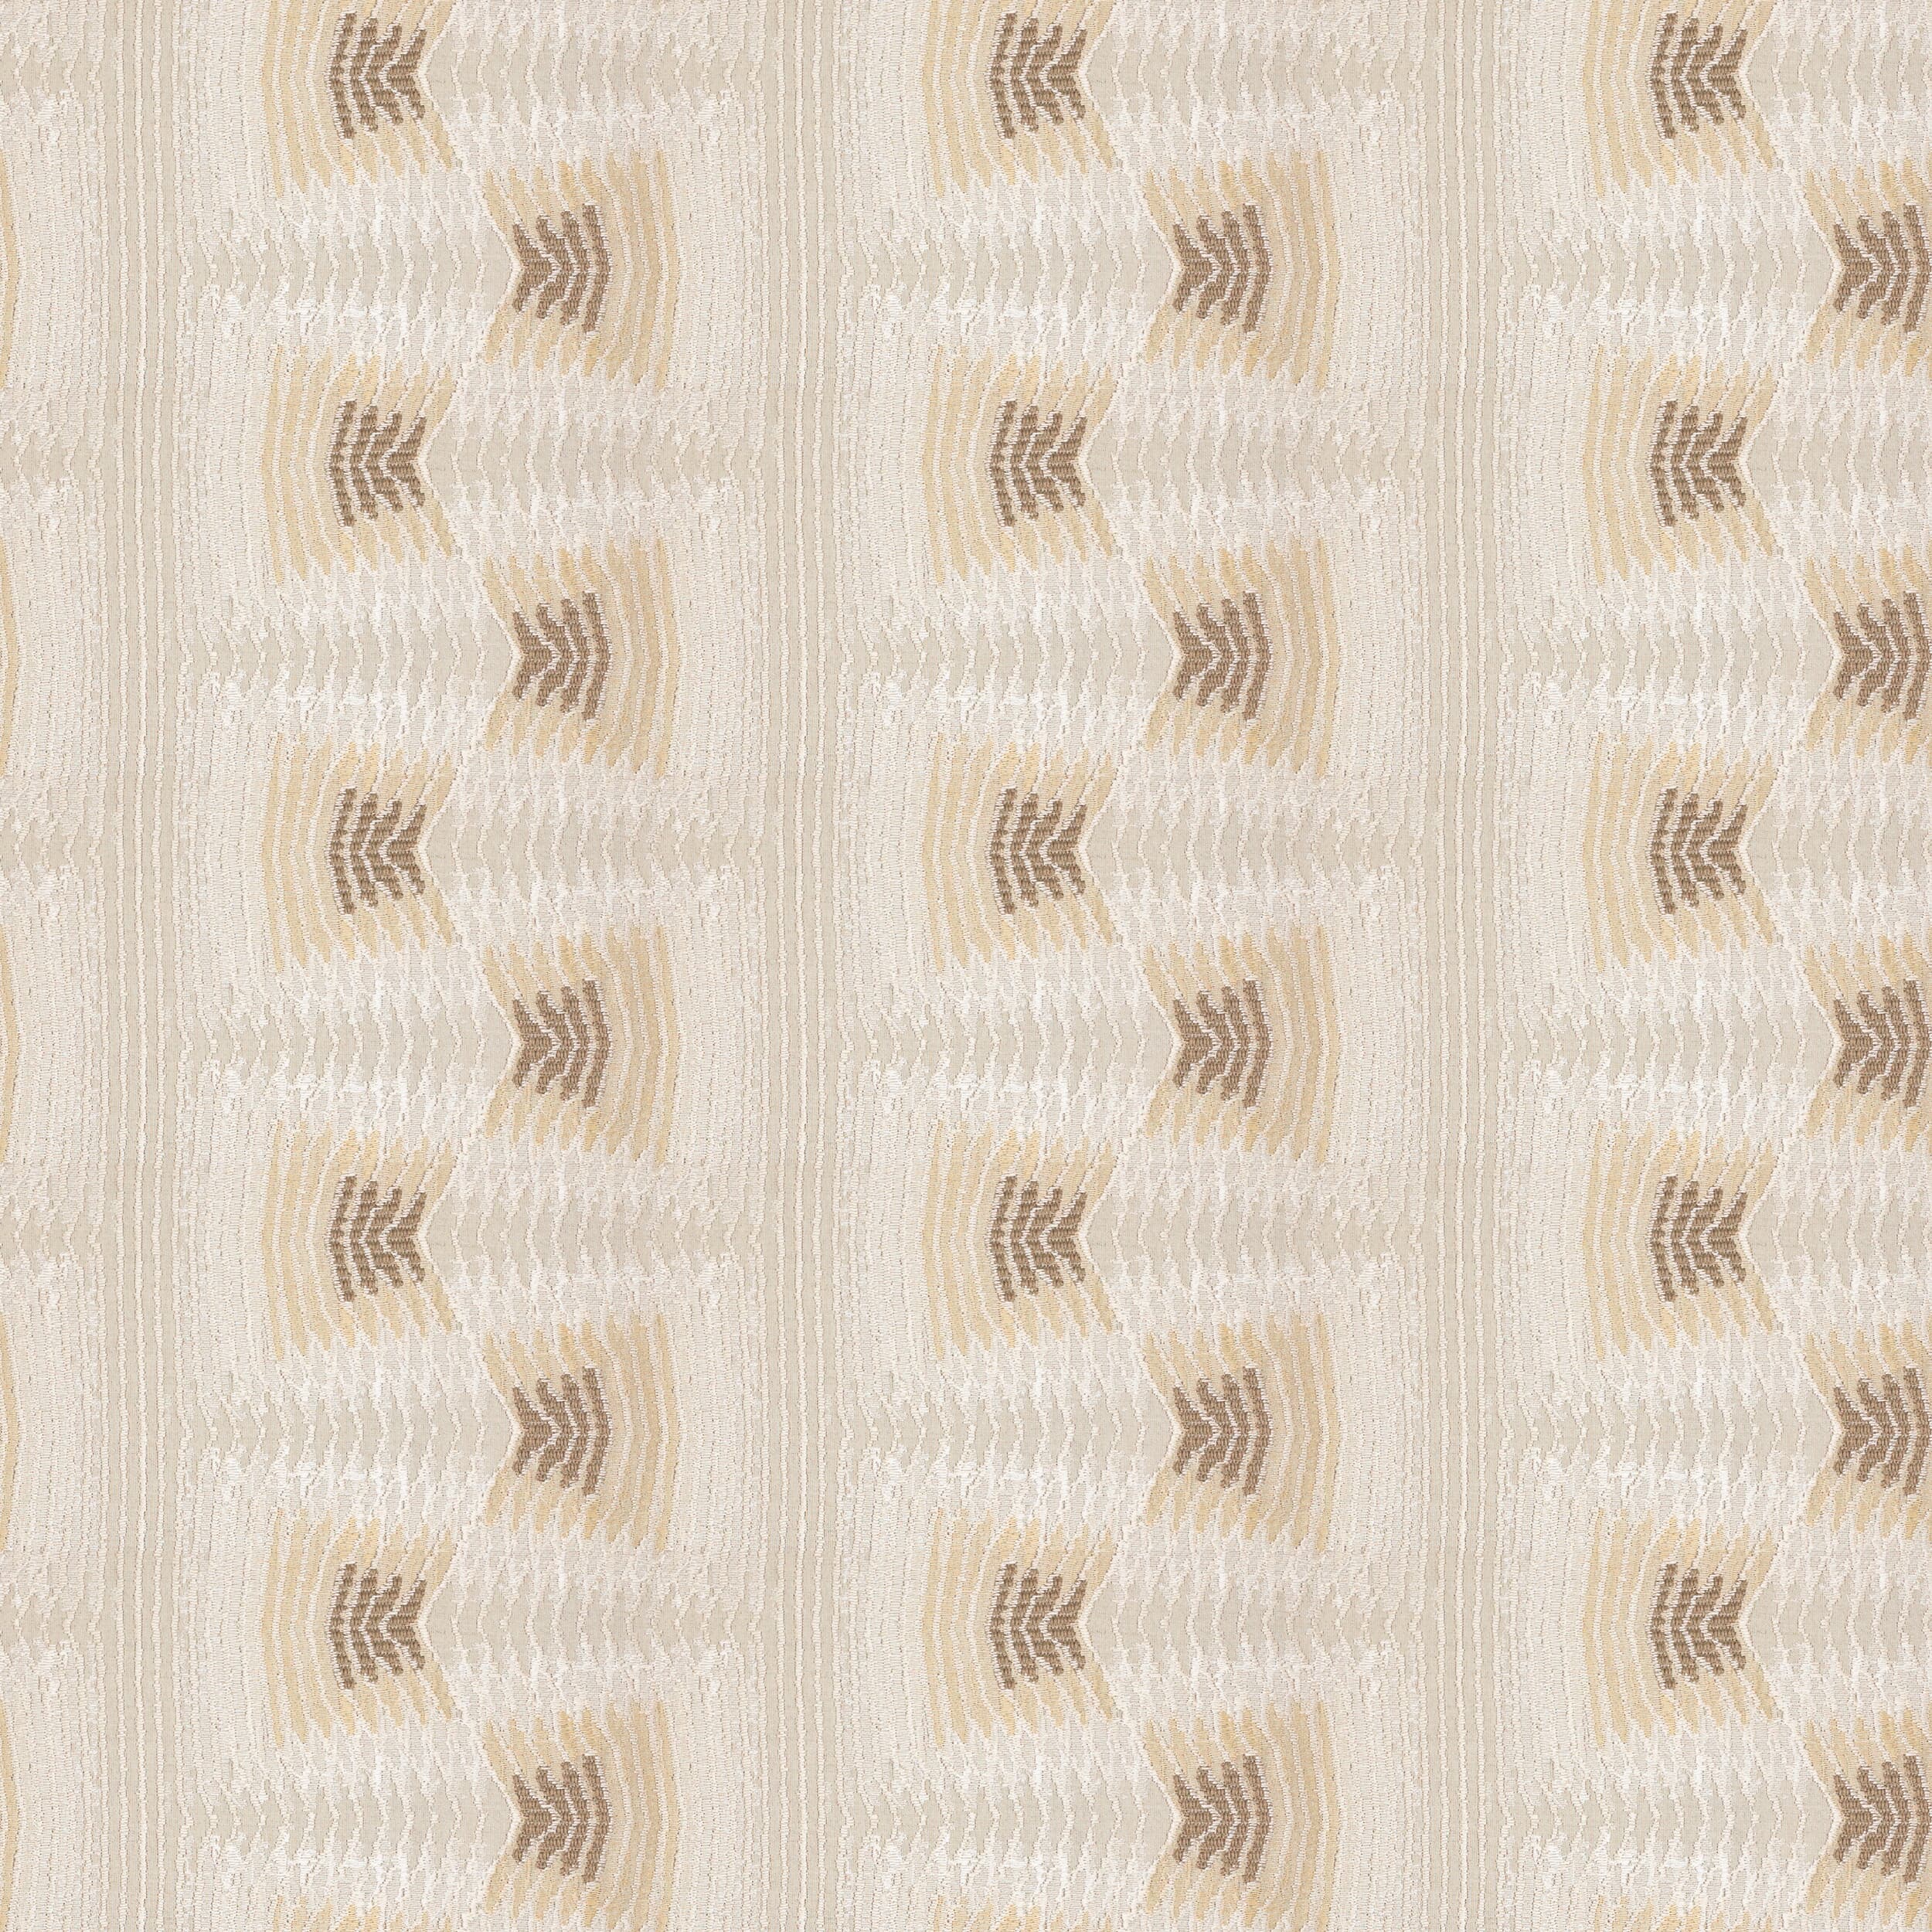 7835-1 Northwood Sandstone by Stout Fabric